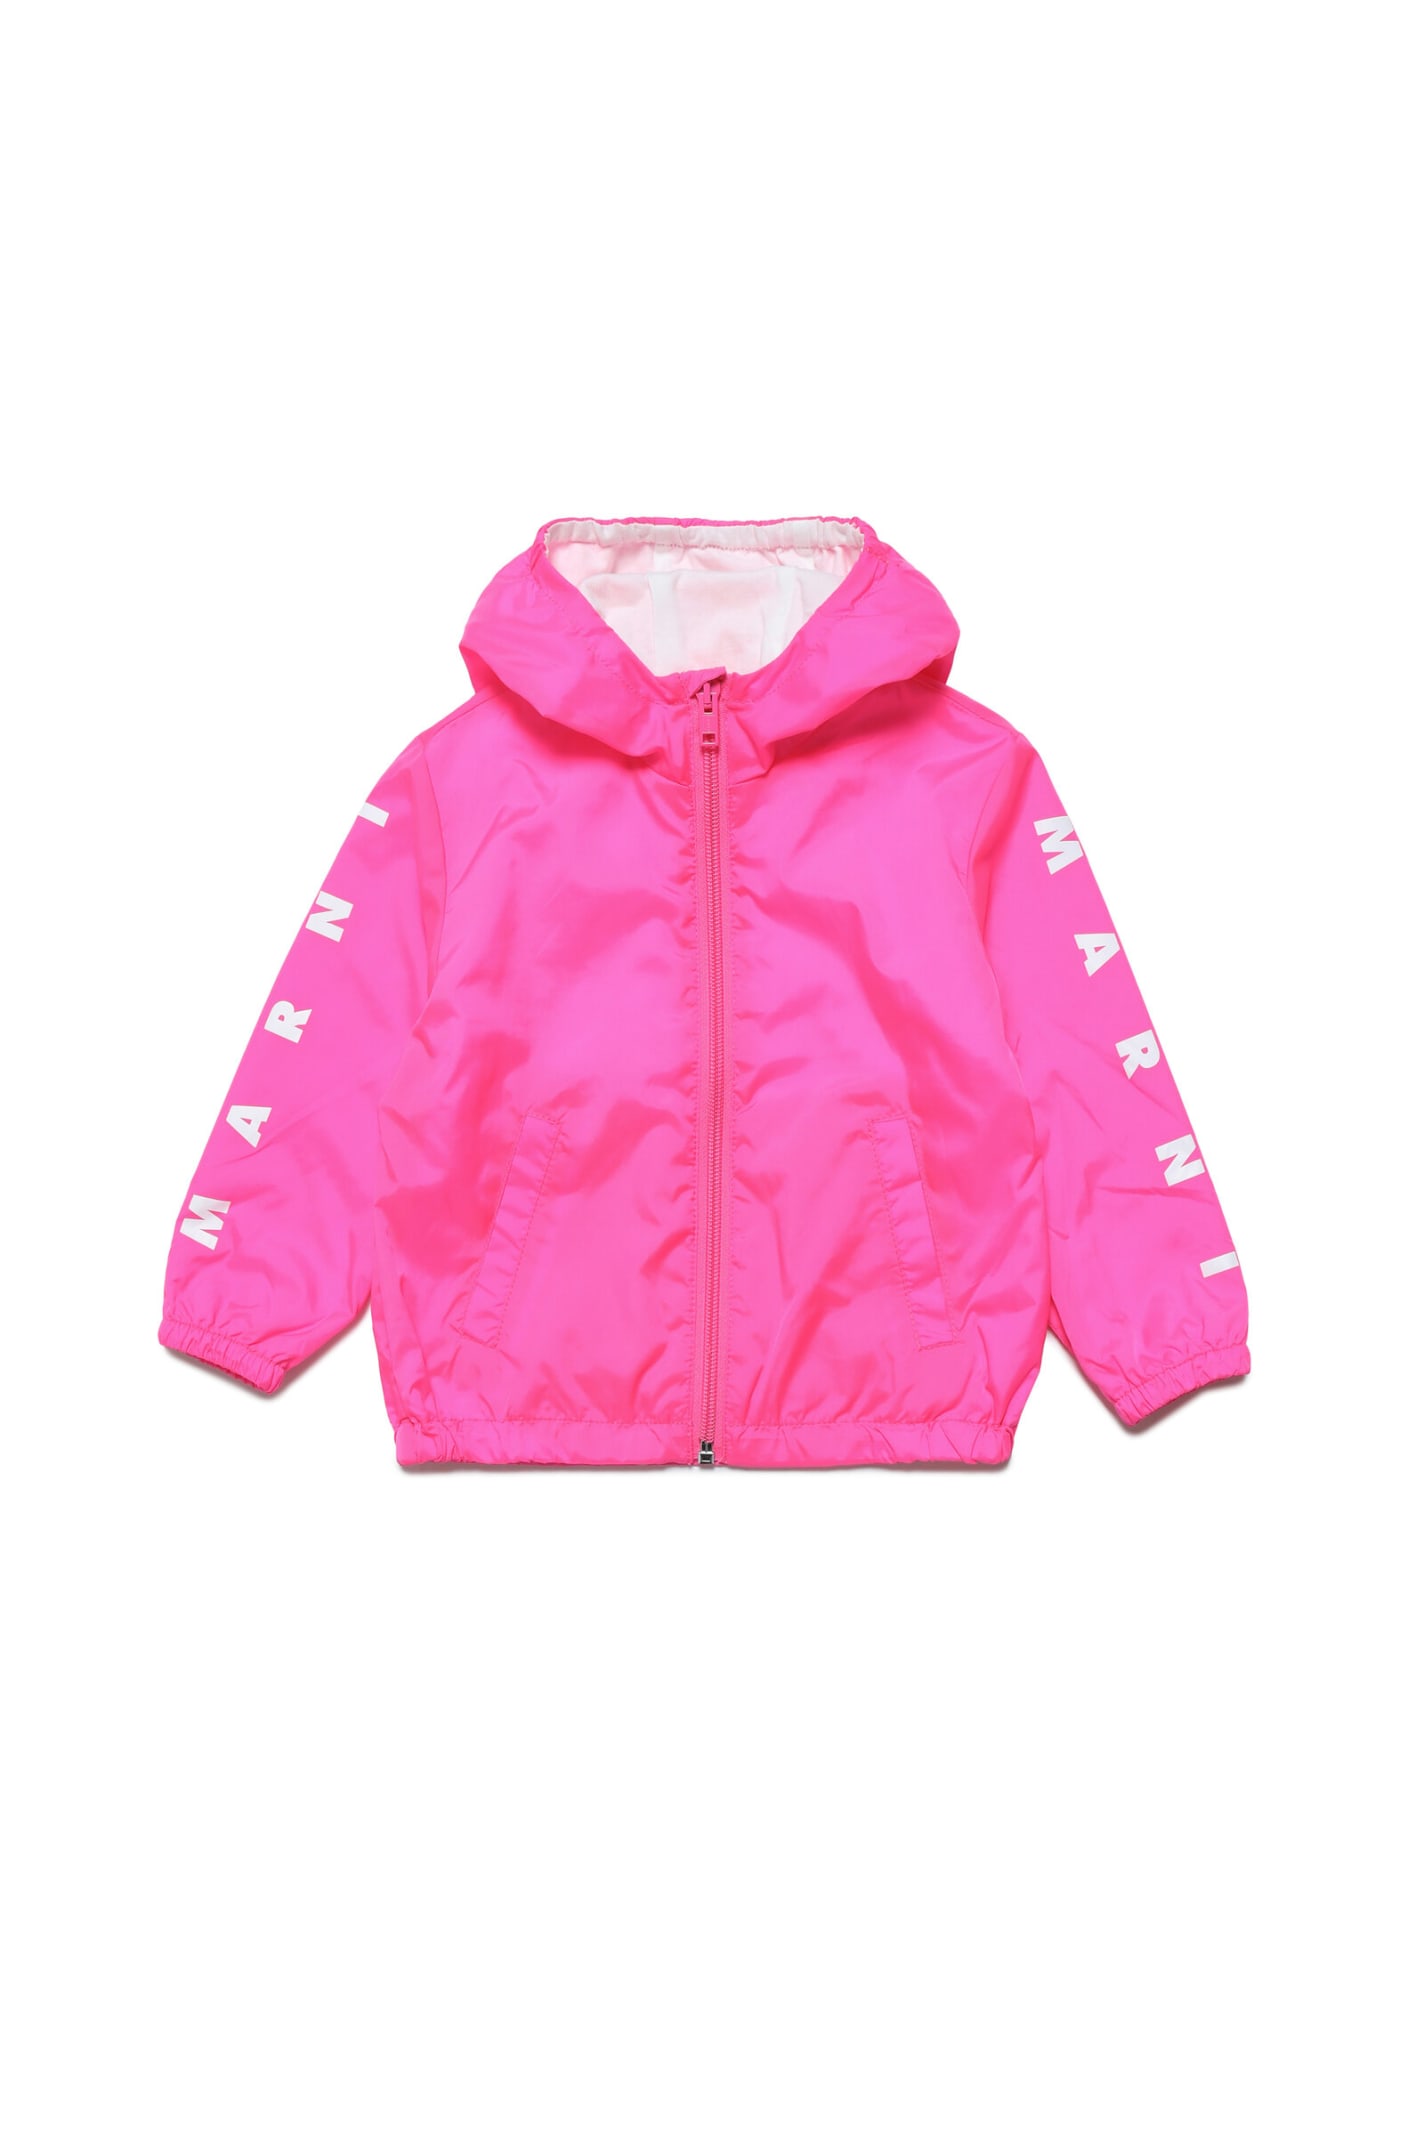 MARNI MJ31B JACKET MARNI FLUO PINK WATERPROOF LINED JACKET WITH HOOD, ZIP AND LOGO ON THE SLEEVES